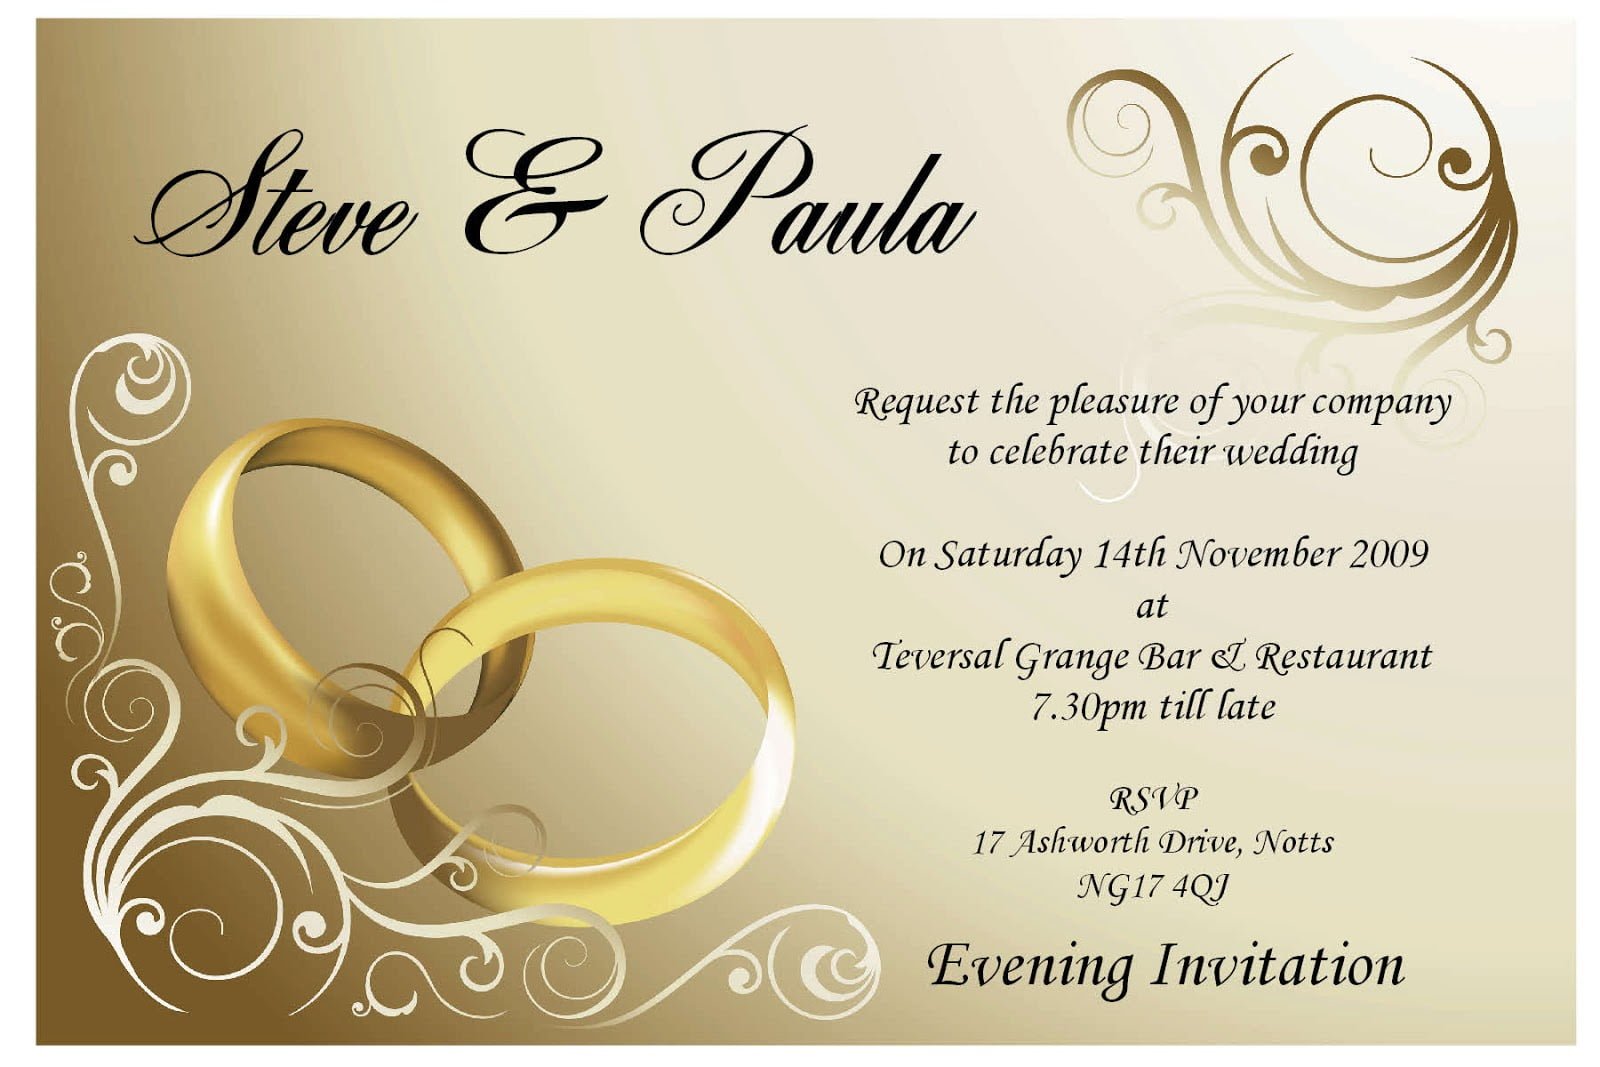 Wedding Card Invitation And Get Inspiration To Create The Wedding